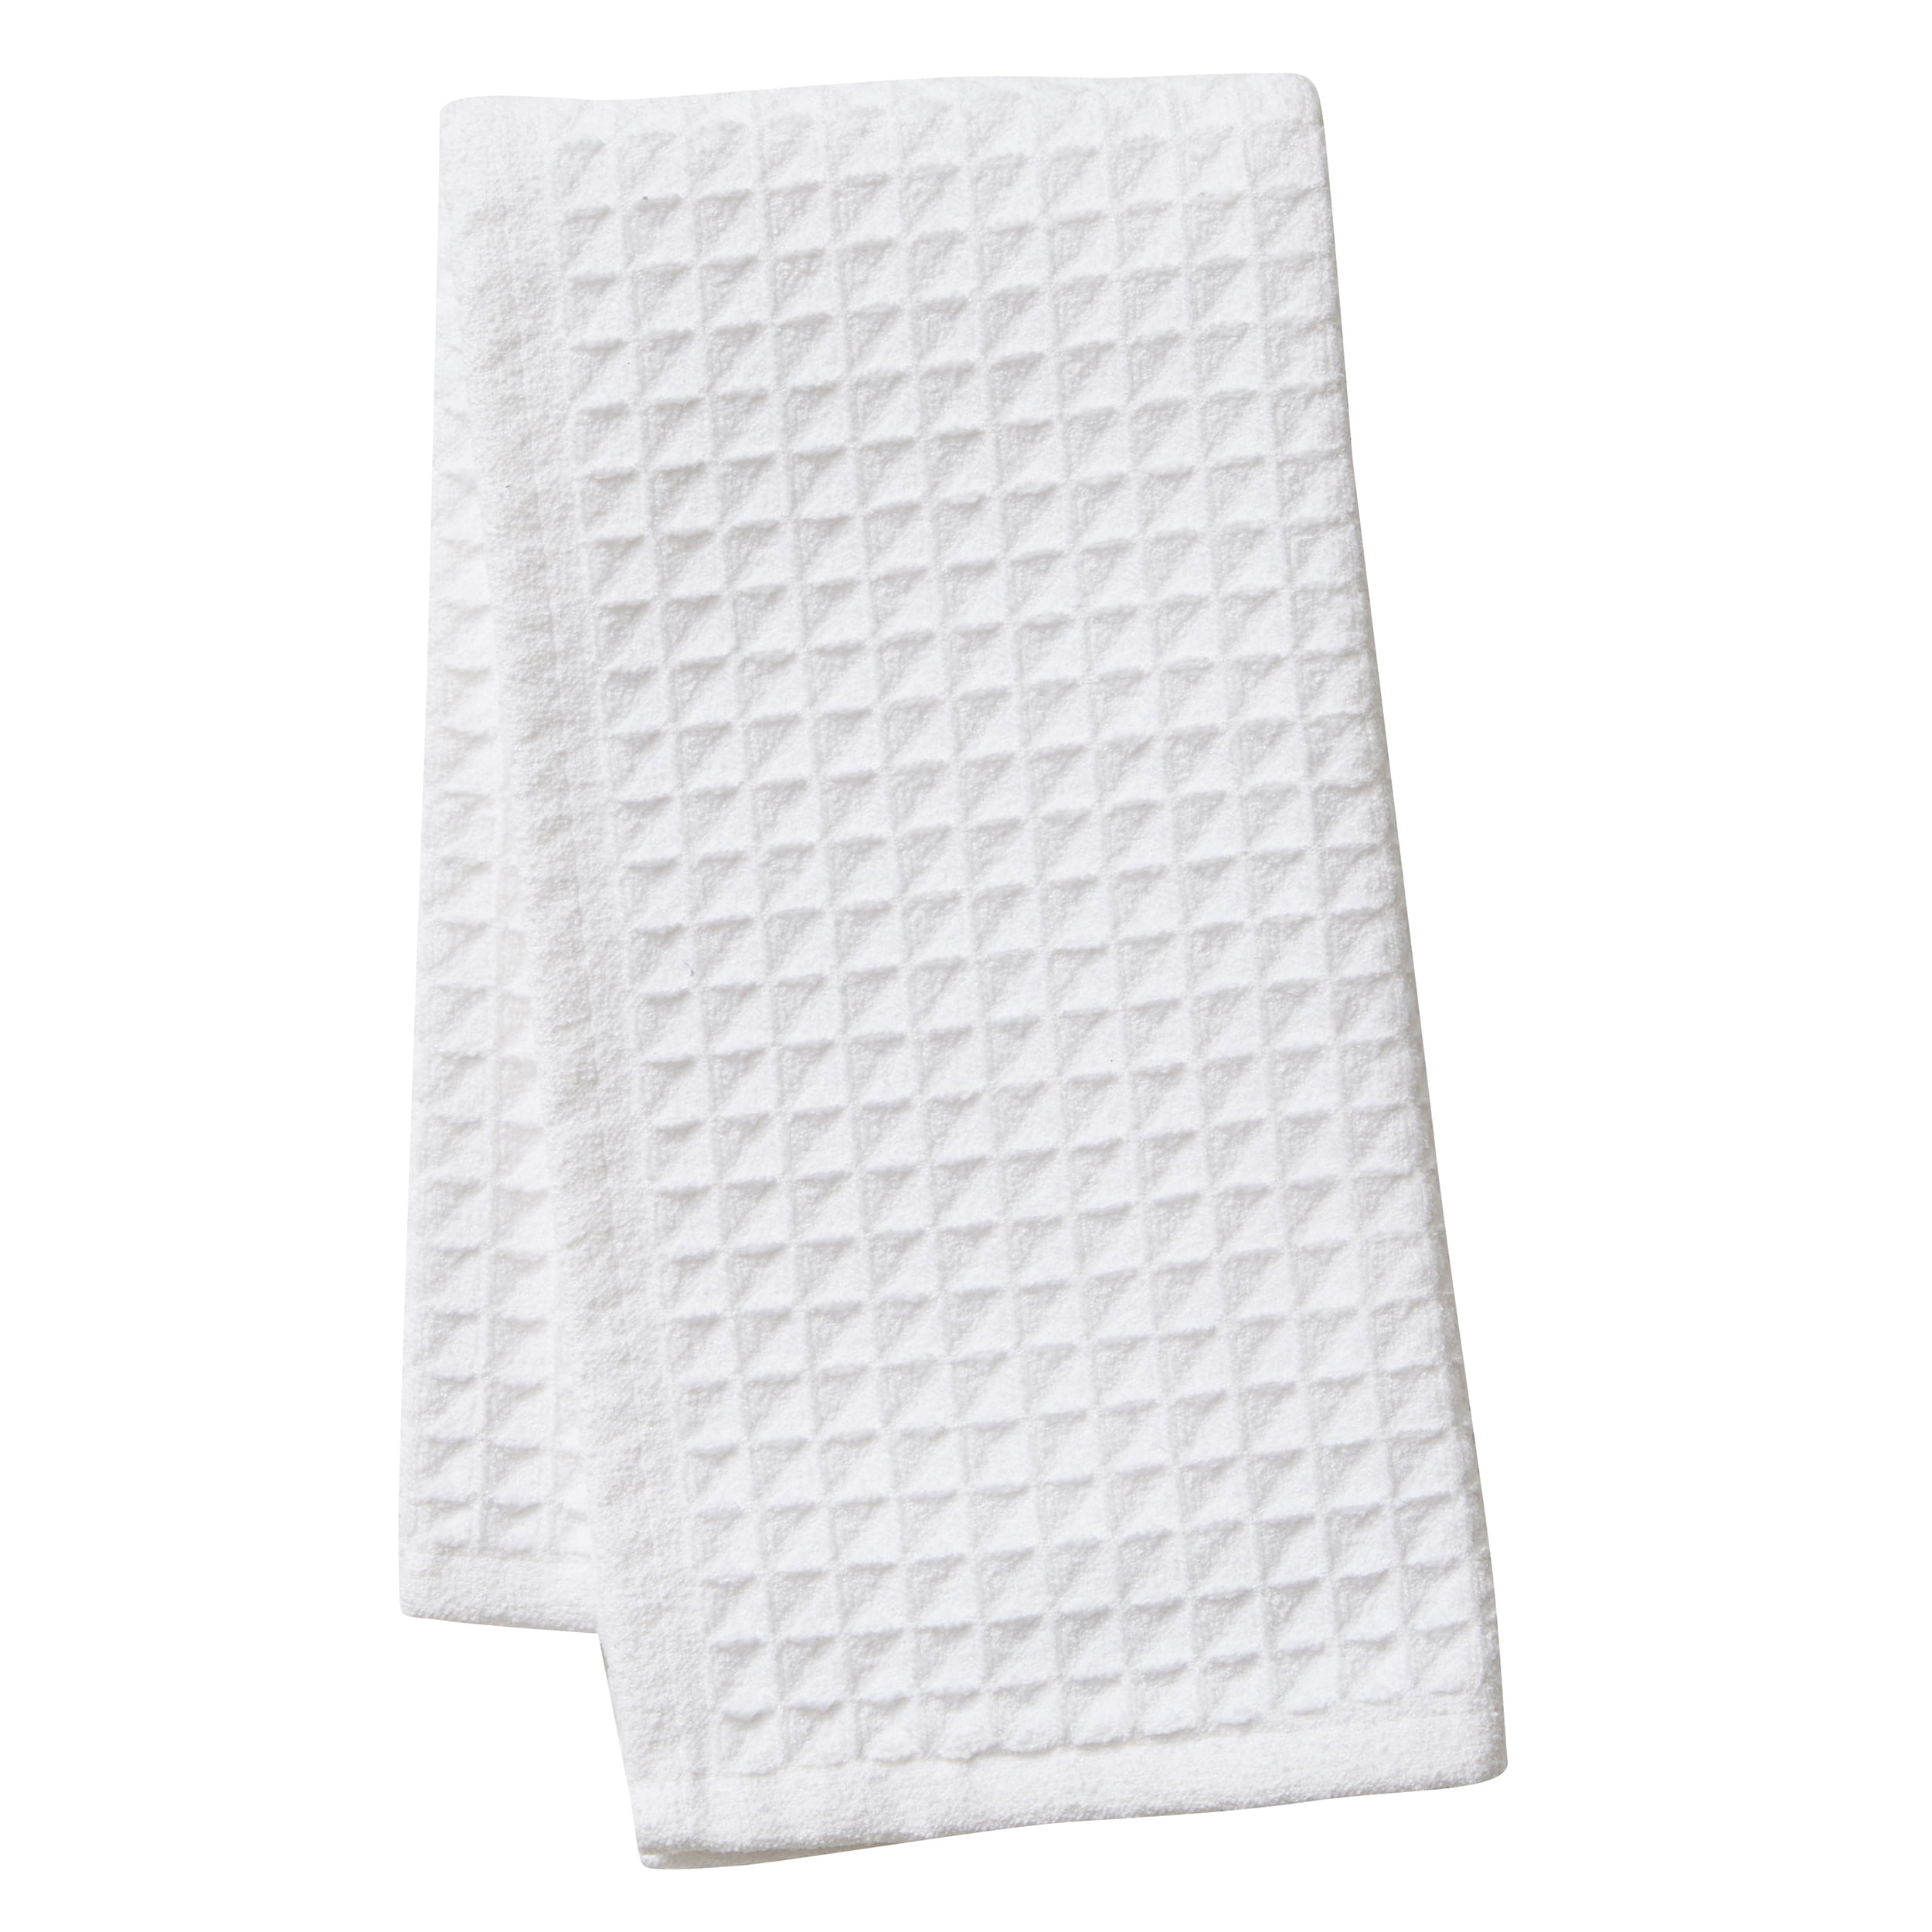 VIVOTE Waffle Weave Towel, 4 Pack 16 inch x 24 inch, White Microfiber Kitchen Towel, Dish Towel Ultra Soft Super Absorbent Fast Drying Machine